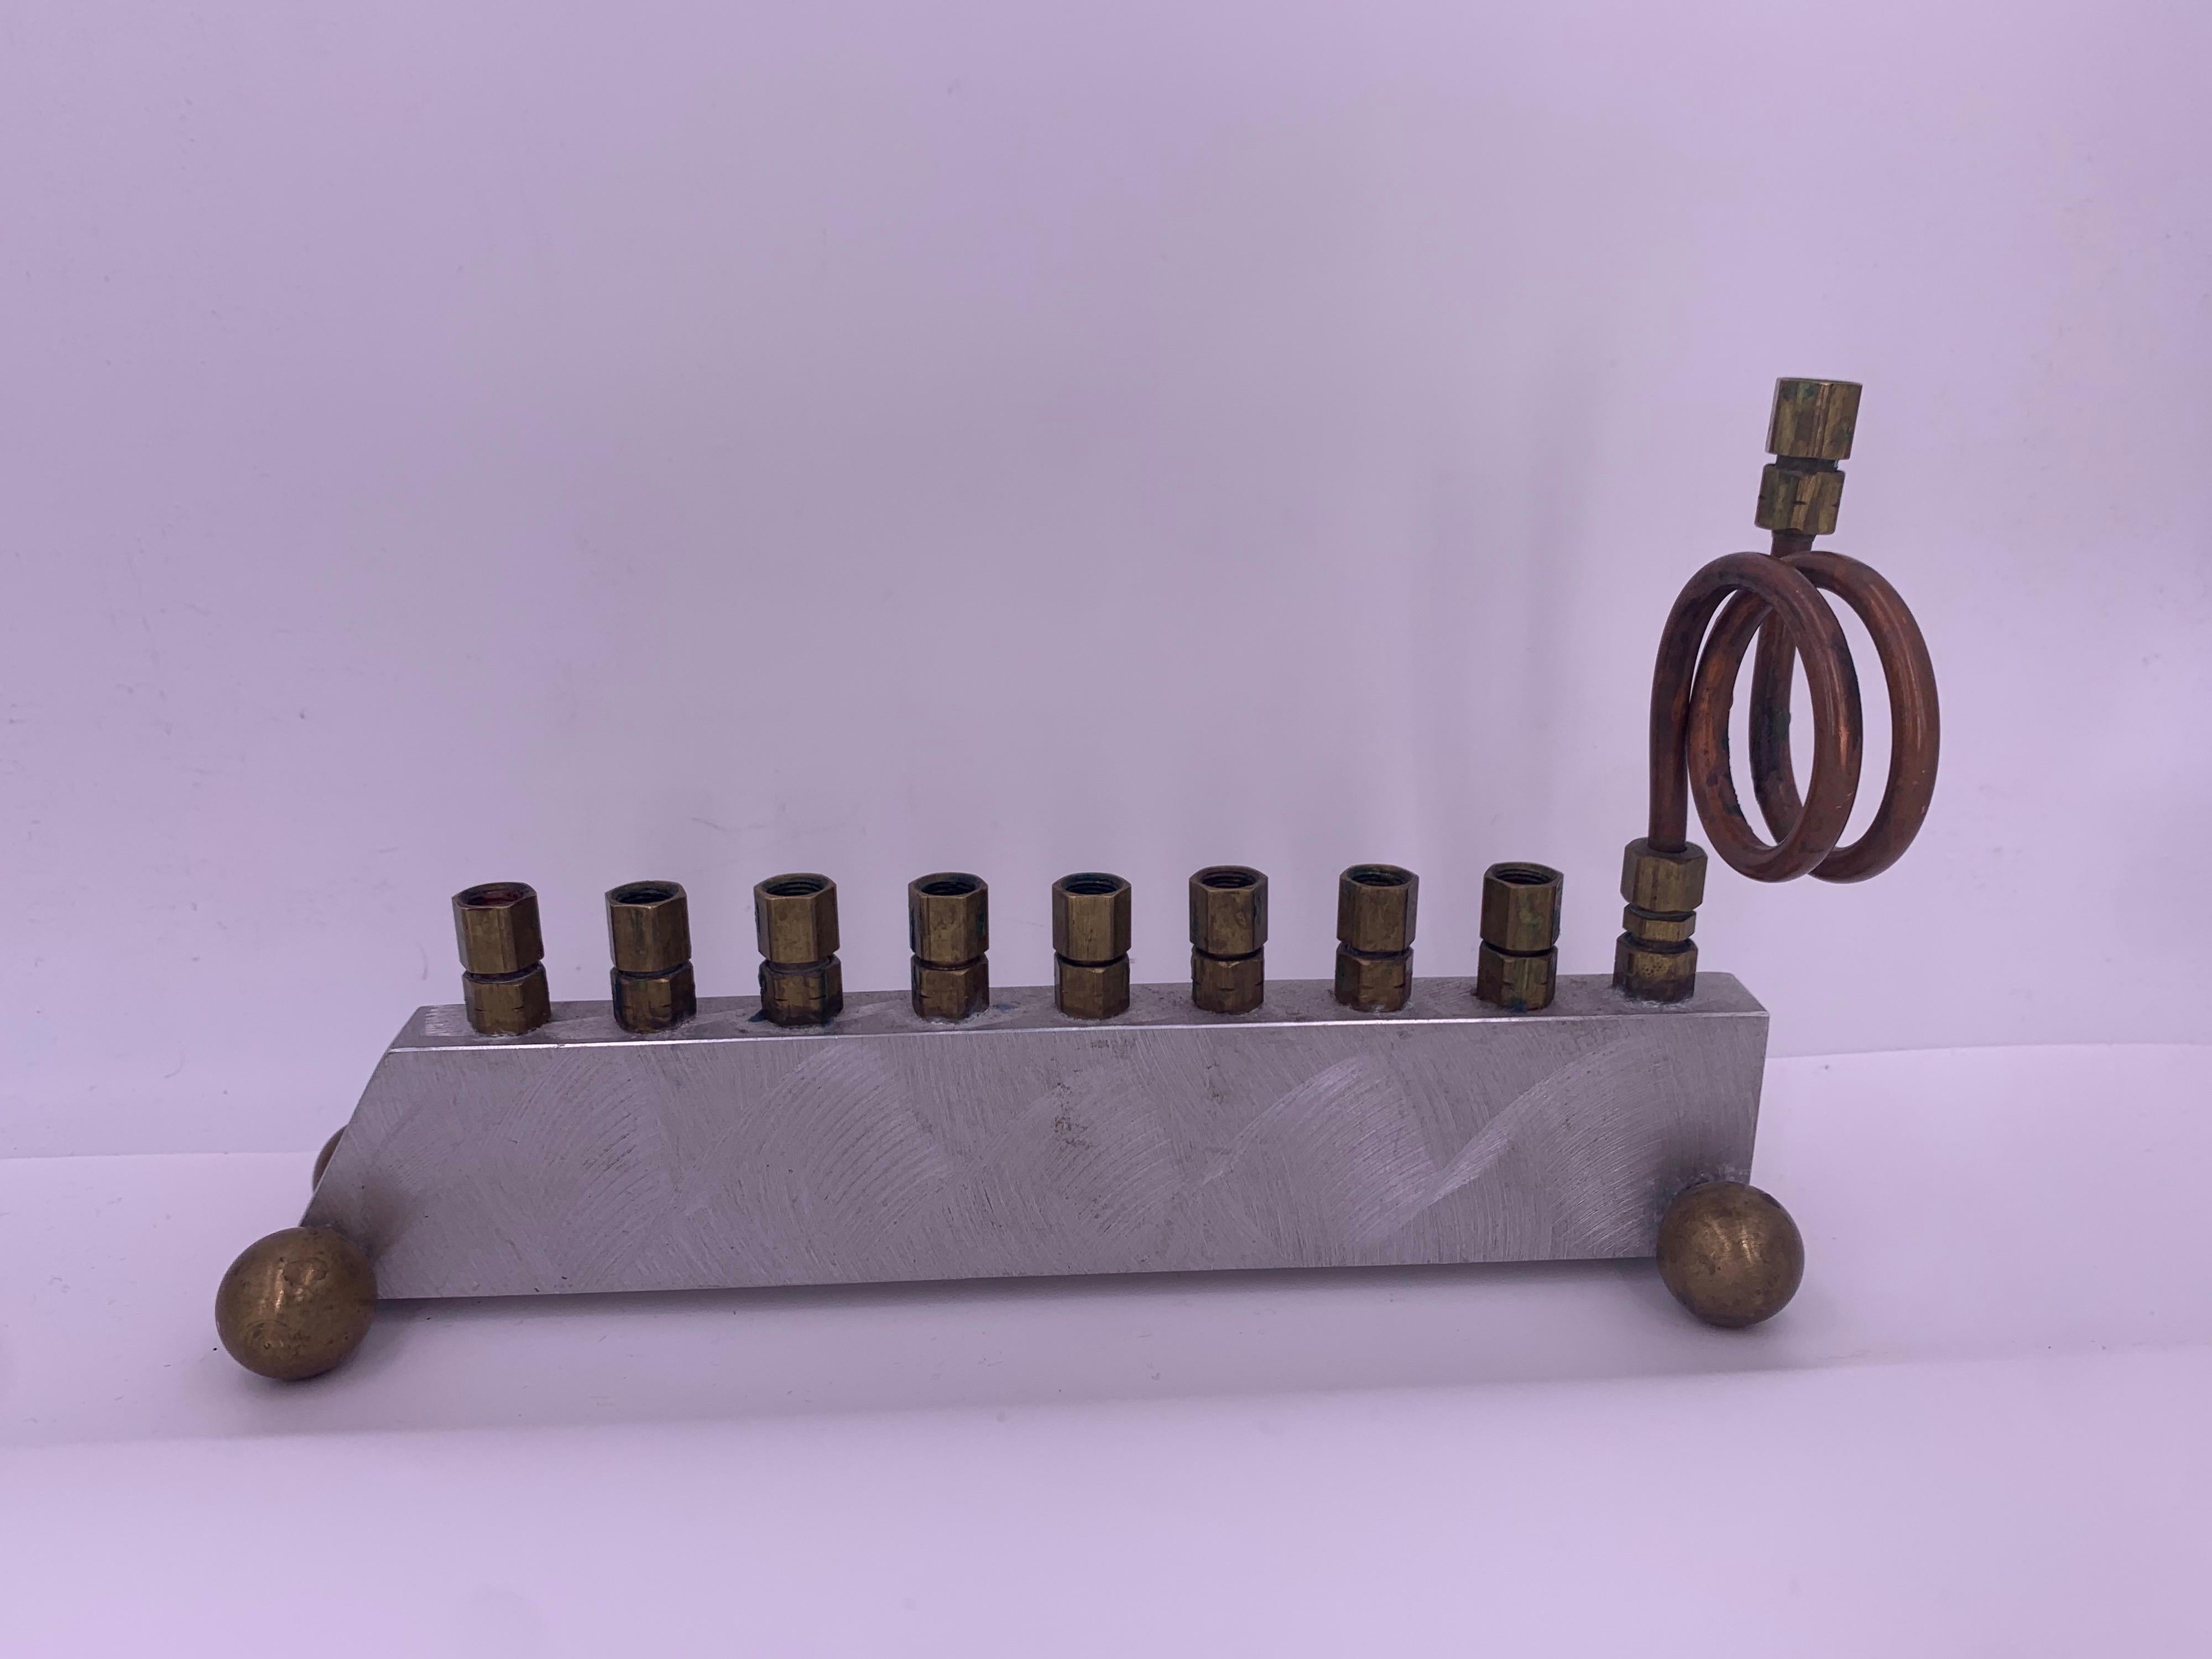 Aluminum and brass Menorah, with a beautiful sculptural appeal. We like how function evolves into art with this piece. A great conversation piece and one that will be appreciated well-beyond the Holidays.